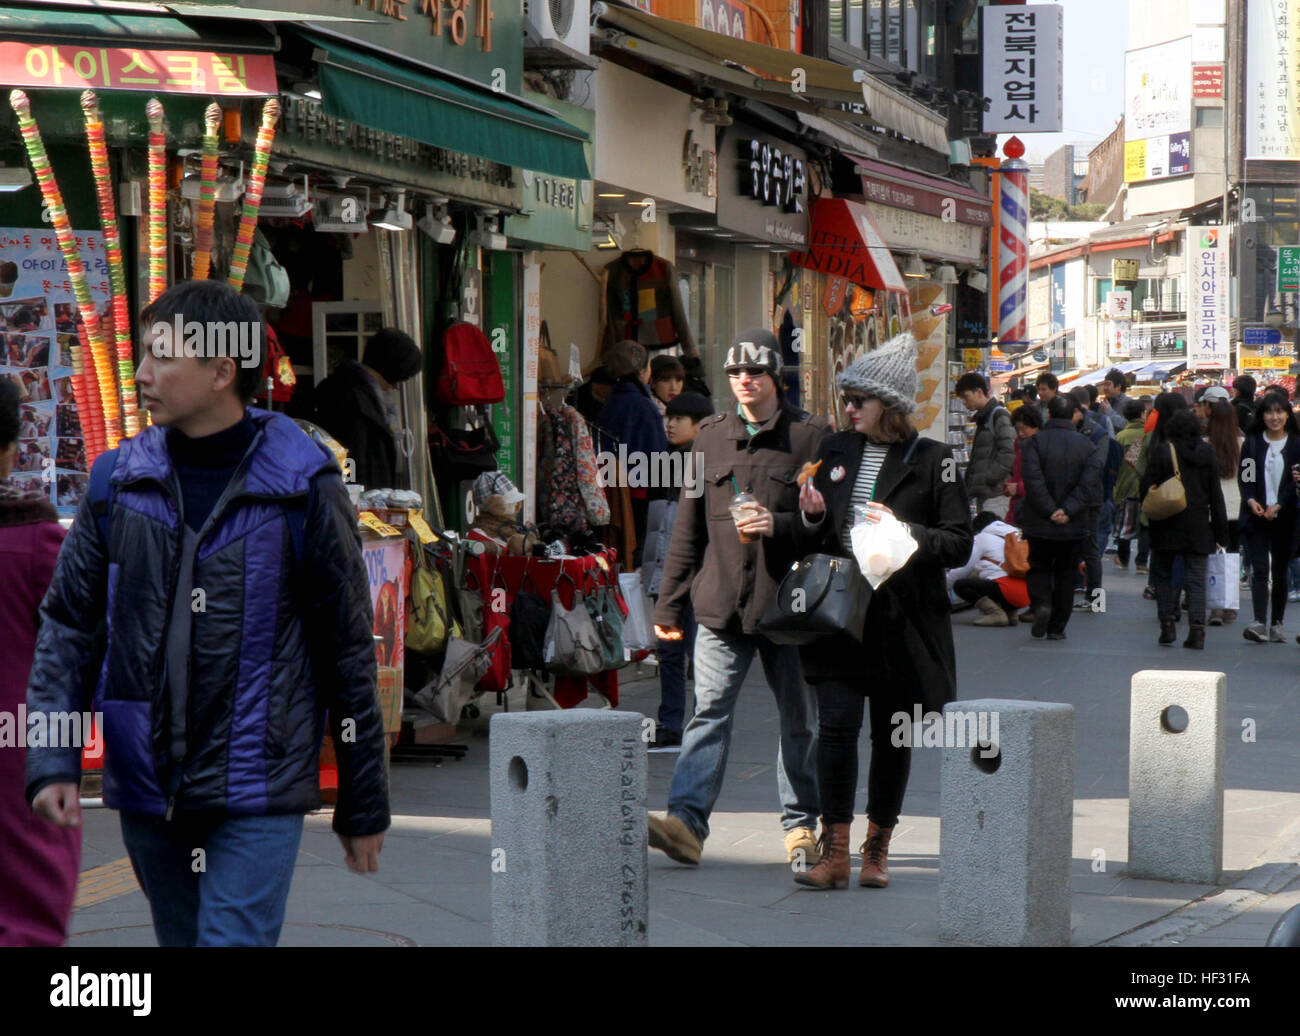 Staff Sgt. Matthew Keeler, a native of Mechanicsburg, Pa., and a public affairs specialist with the 109th Mobile Public Affairs Detachment, Pennsylvania Army National Guard, strolls through the Nam Dae Mun market area of Seoul, South Korea, with his sister, Samantha Keeler, on March 6, 2015. Keeler had the opportunity to spend a day with his sister, who teaches English at a Korean secondary school, during a break in his annual training in support of exercise Key Resolve 2015, part of which took place in Yongsan Garrison. Siblings meet in Seoul 150306-Z-AD415-093 Stock Photo